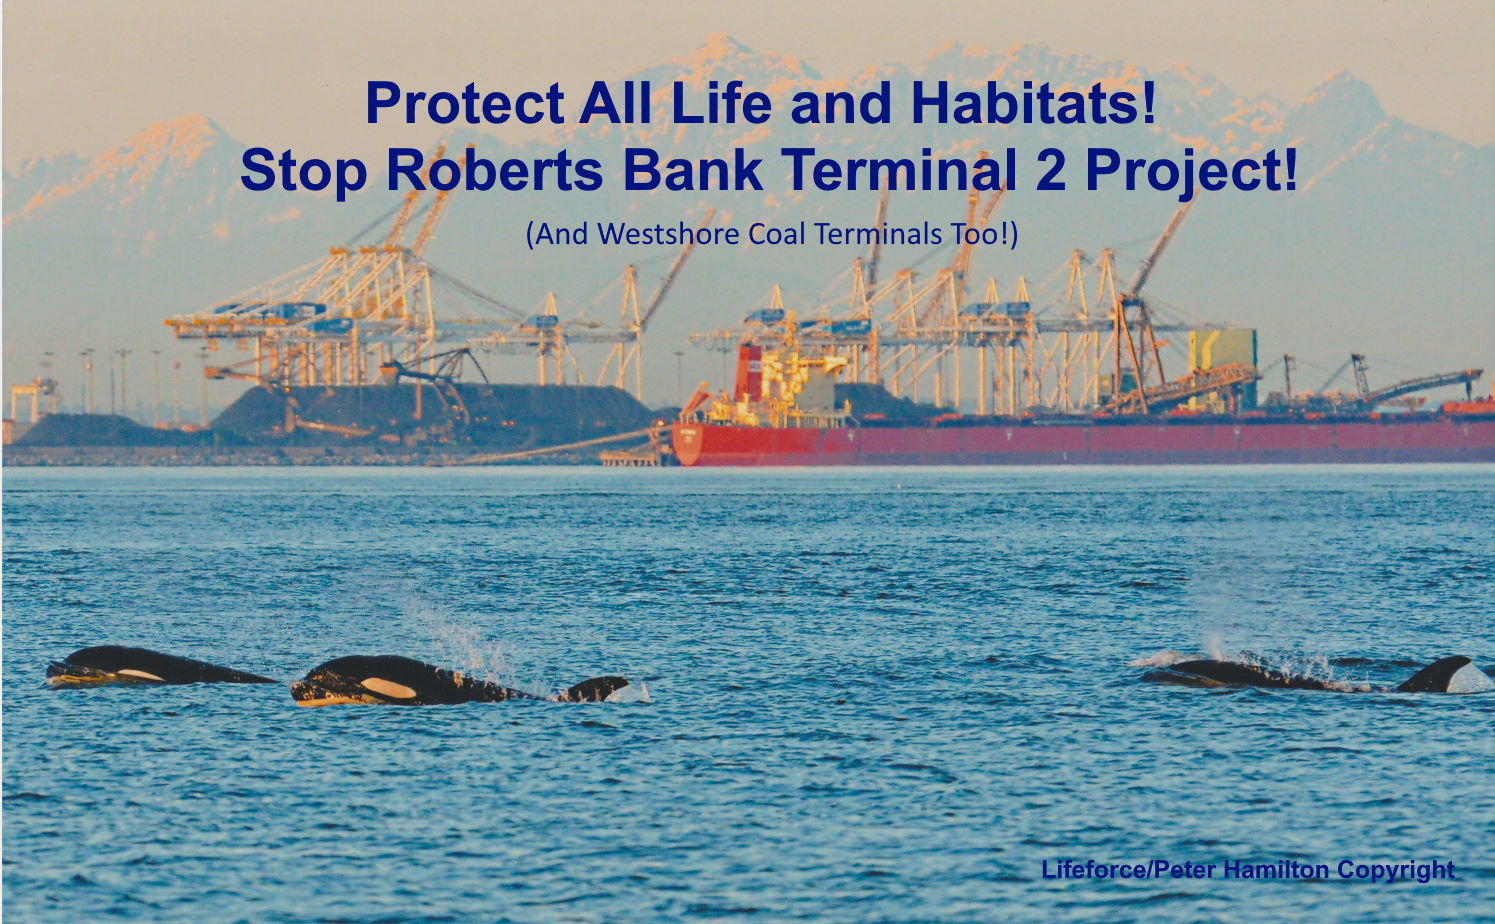 Hoping For The End Of Roberts Bank Terminal 2 Expansion!